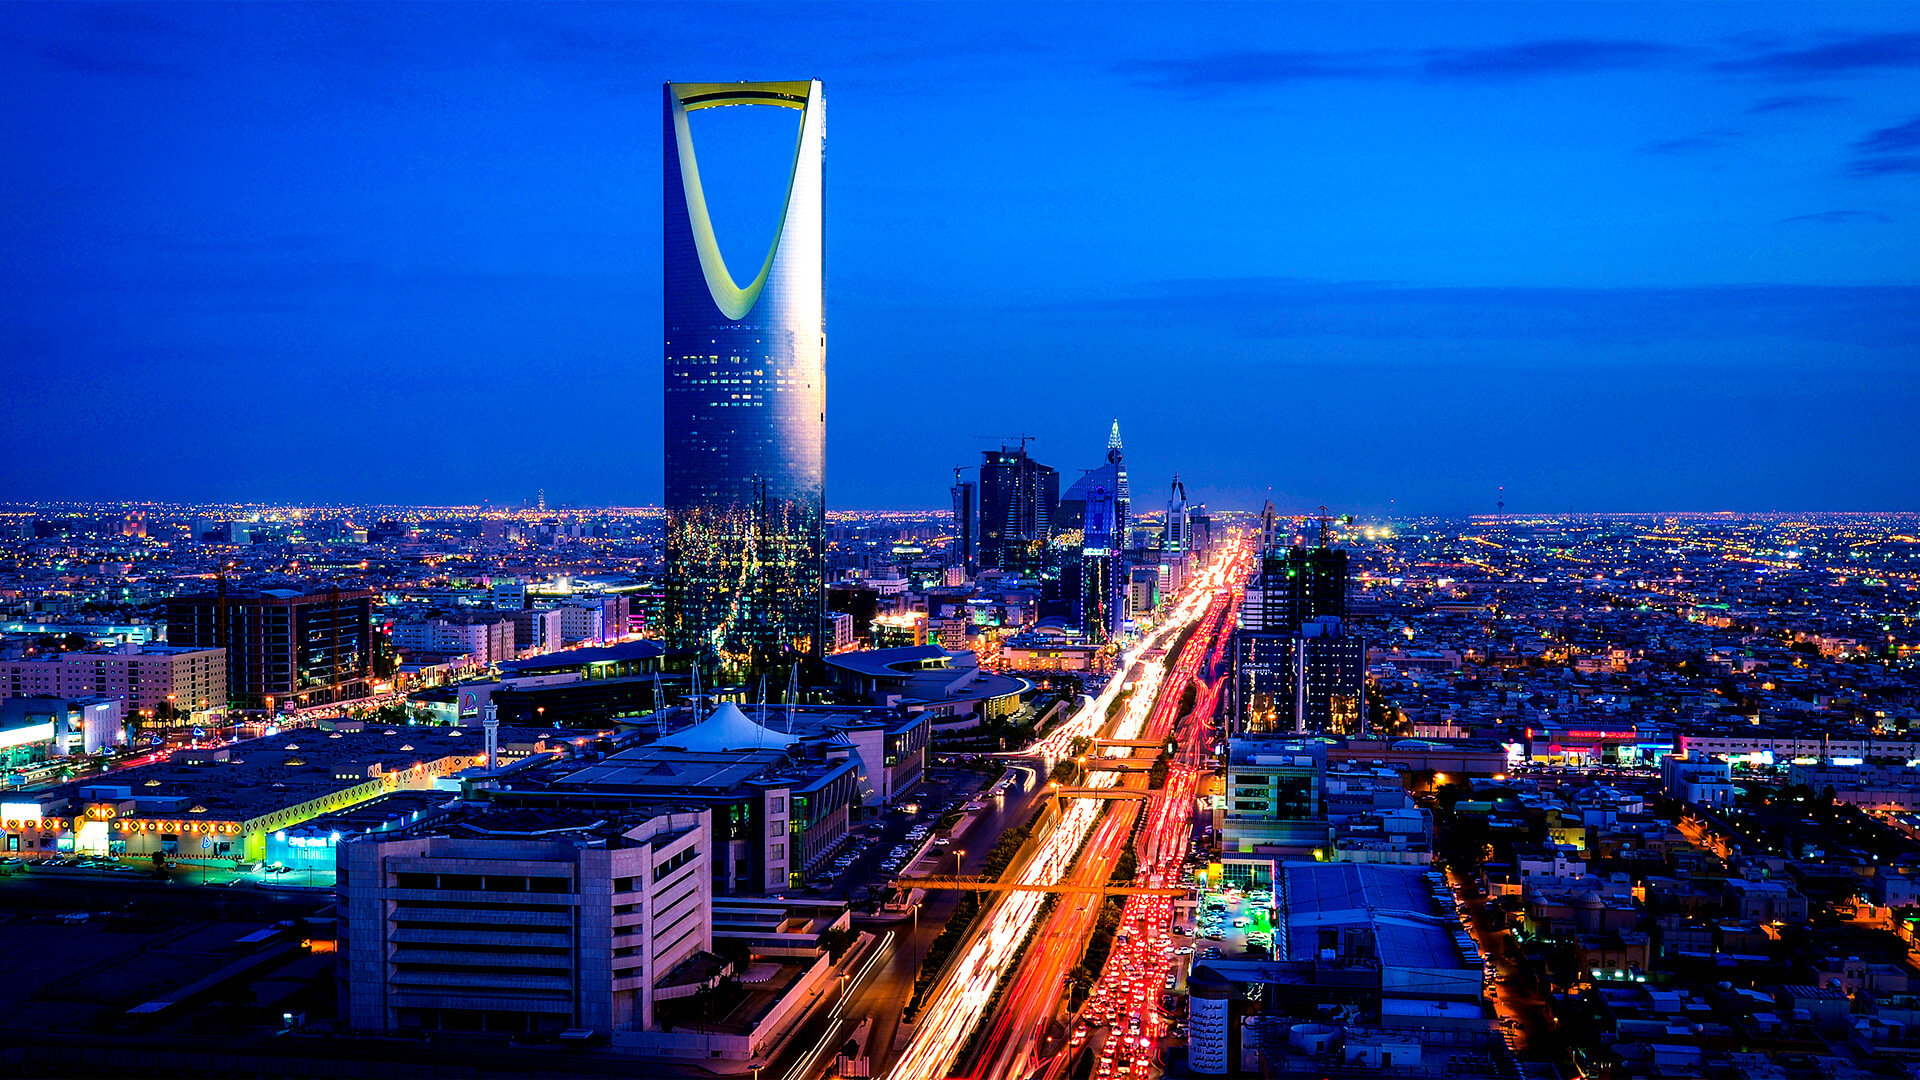  Saudi Arabia's AI investment fund is set to invest billions of dollars in the development of artificial intelligence technologies.